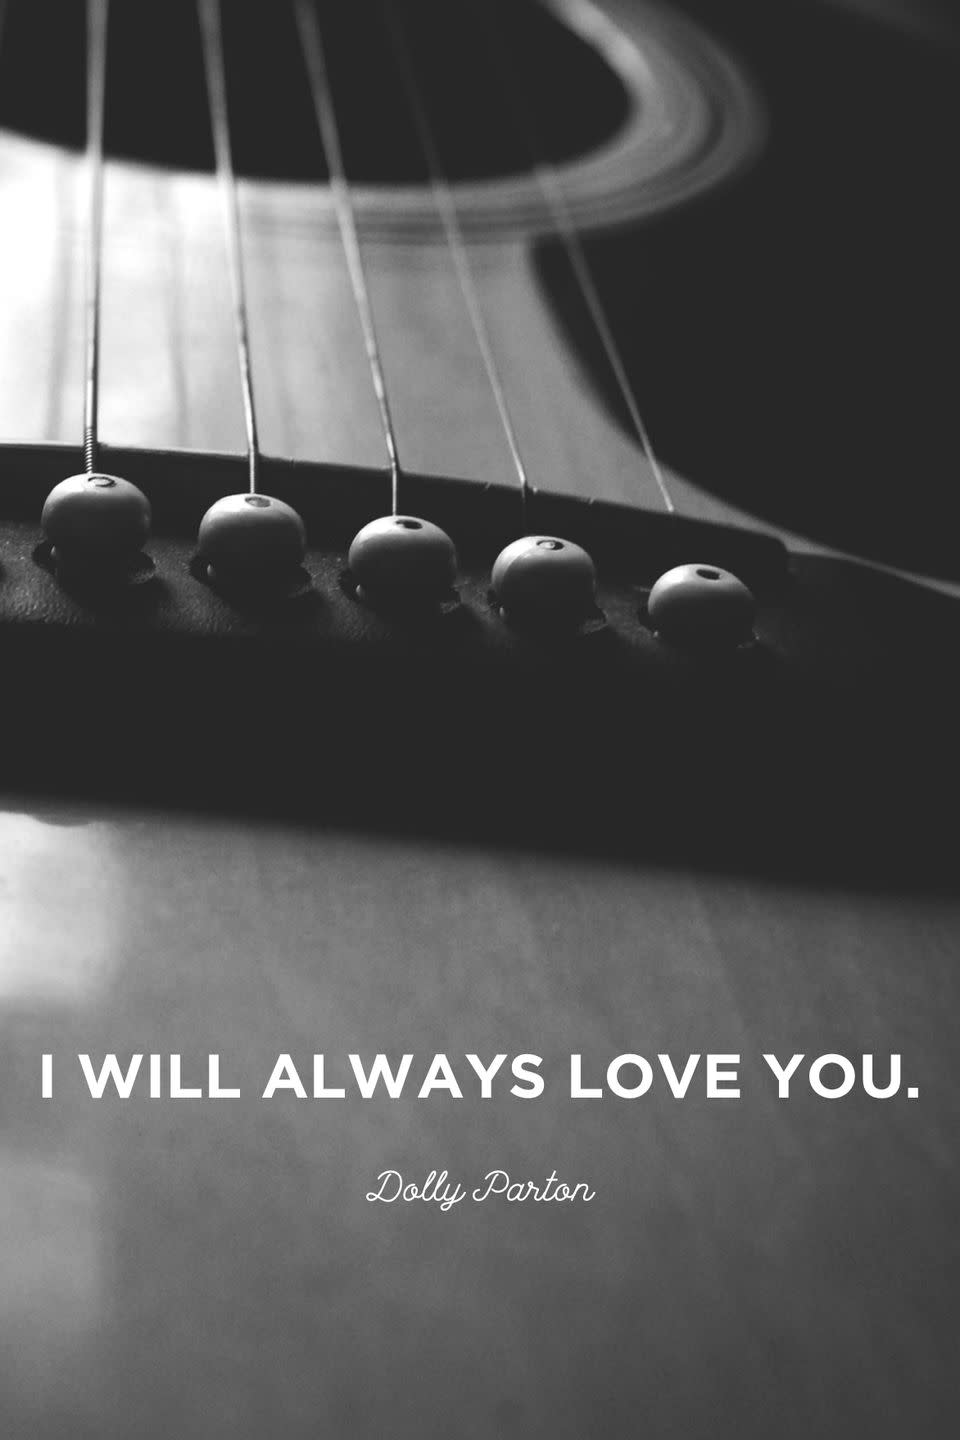 Dolly Parton, "I Will Always Love You"